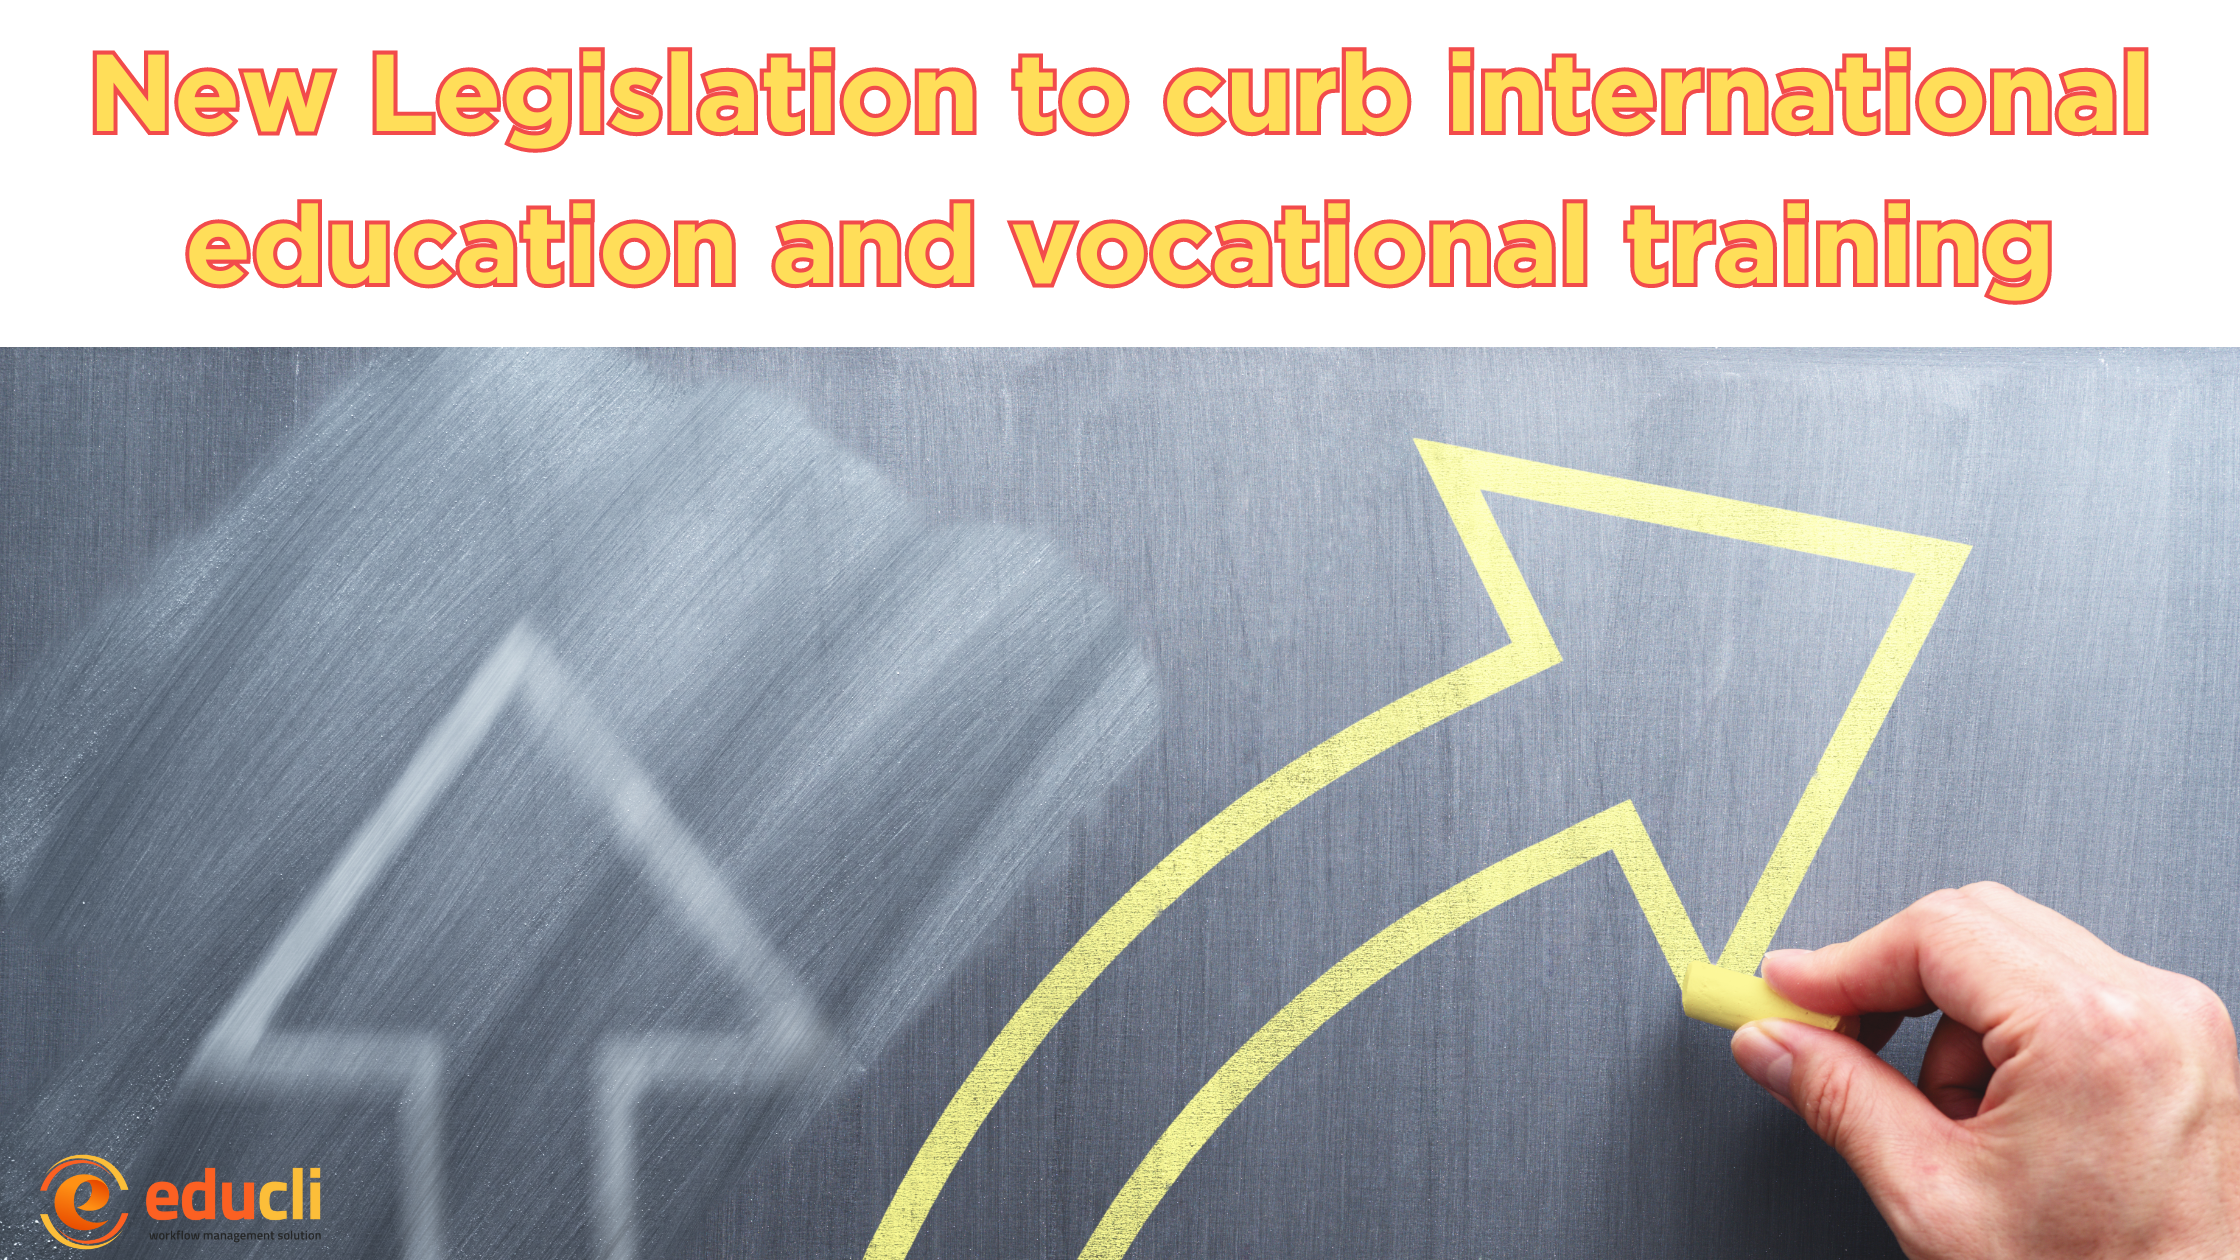 New Legislation introduced to curb international education and vocational training